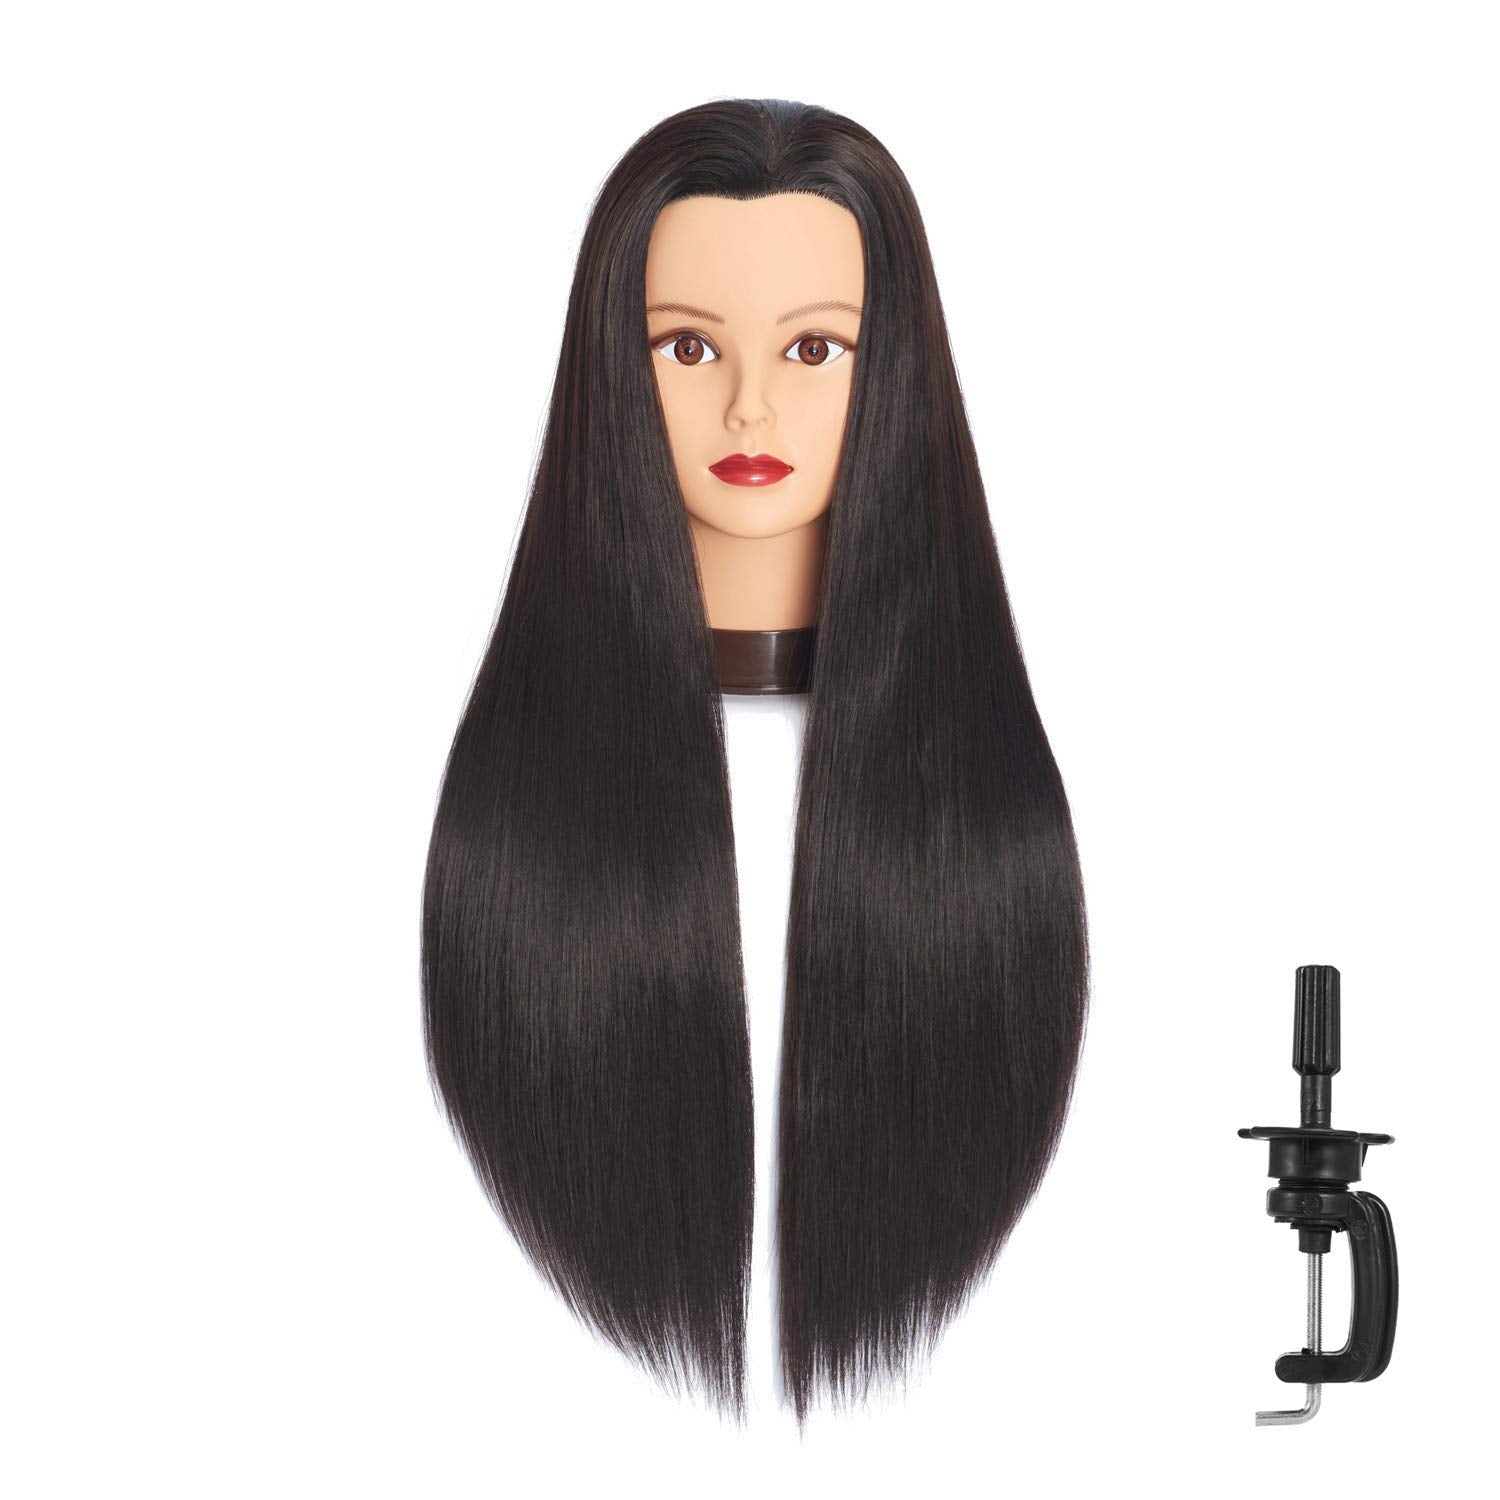 Professional Styling Mannequin Head for Braiding Hairdressing